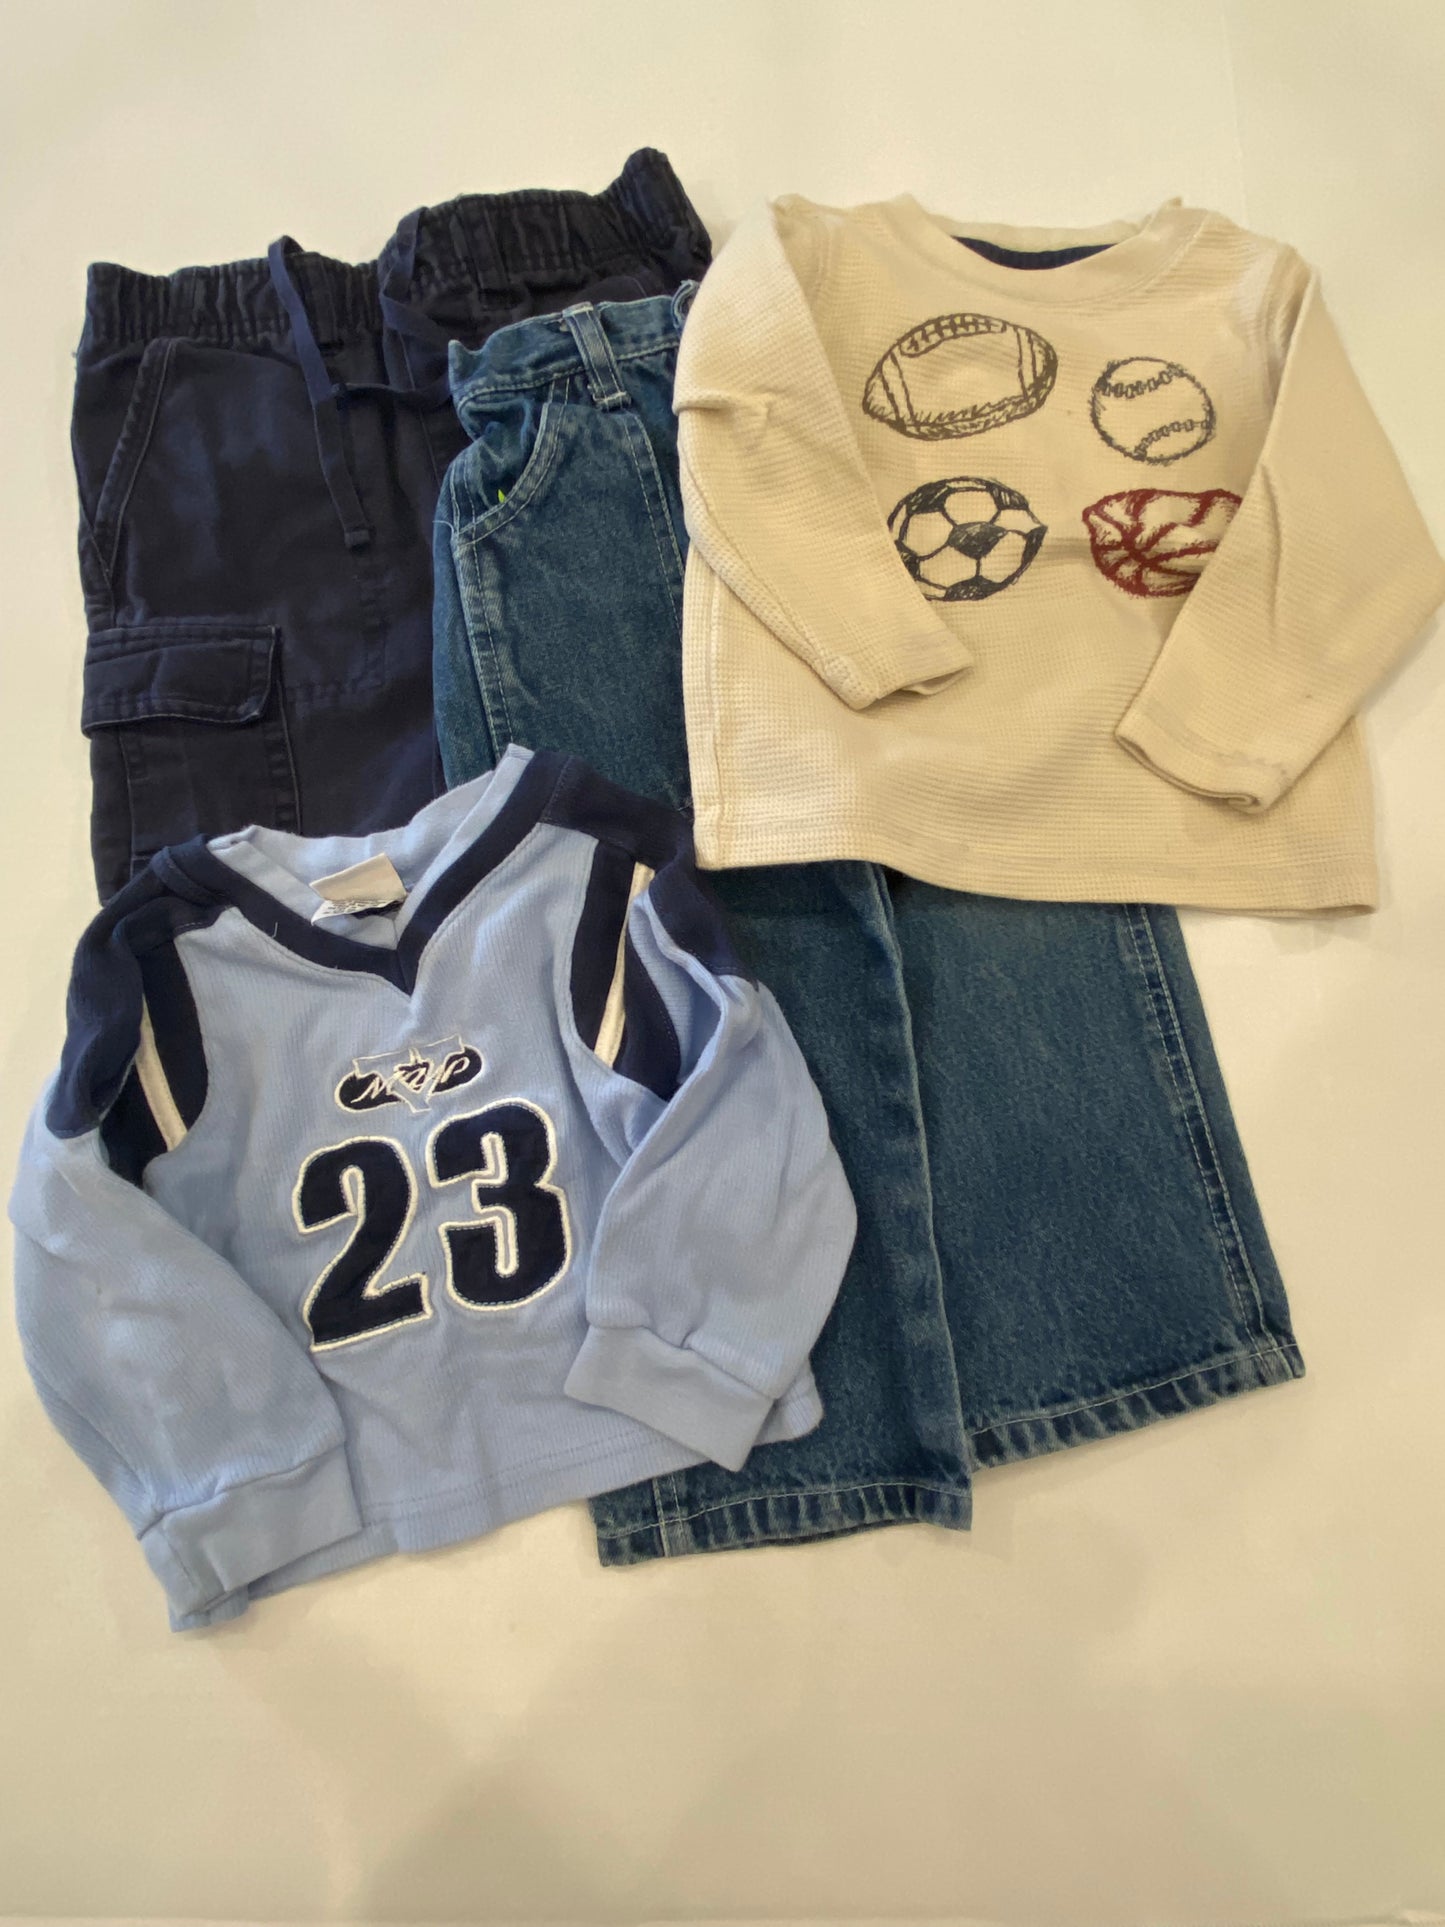 Reduced Boys 2t mixed outfit bundle